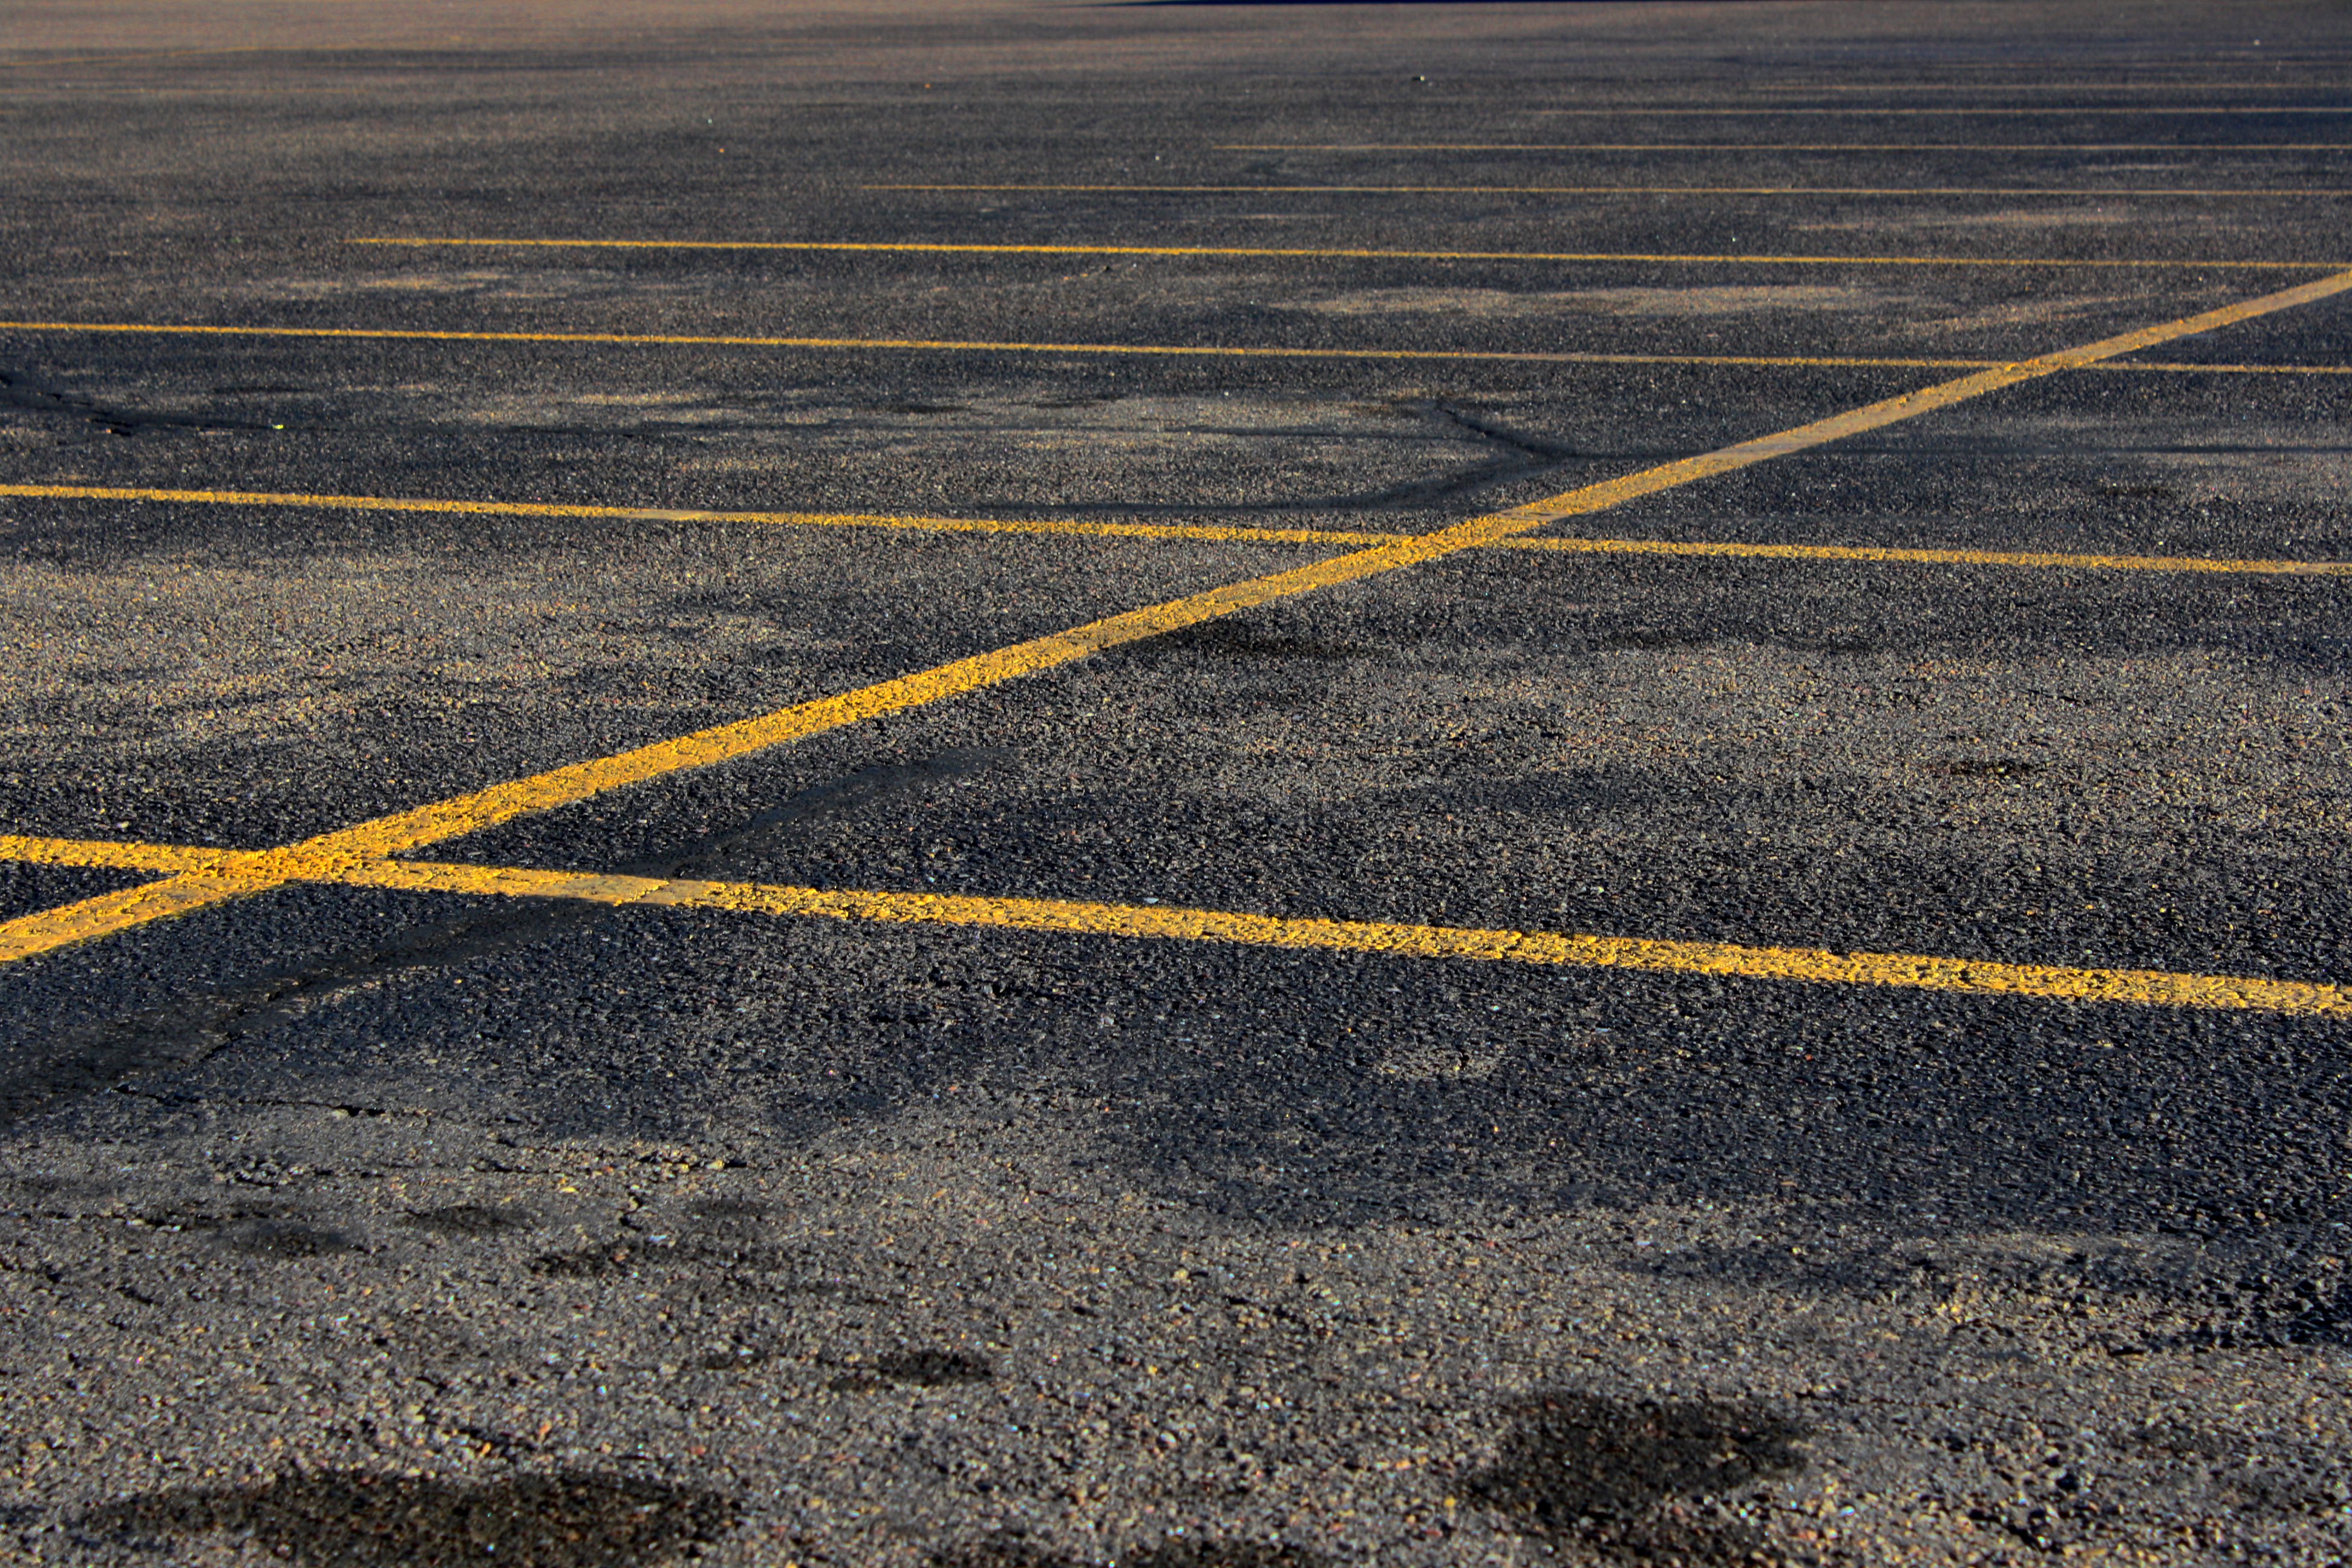 Free High Resolution Photo Of An Empty Parking Lot - Hotel , HD Wallpaper & Backgrounds